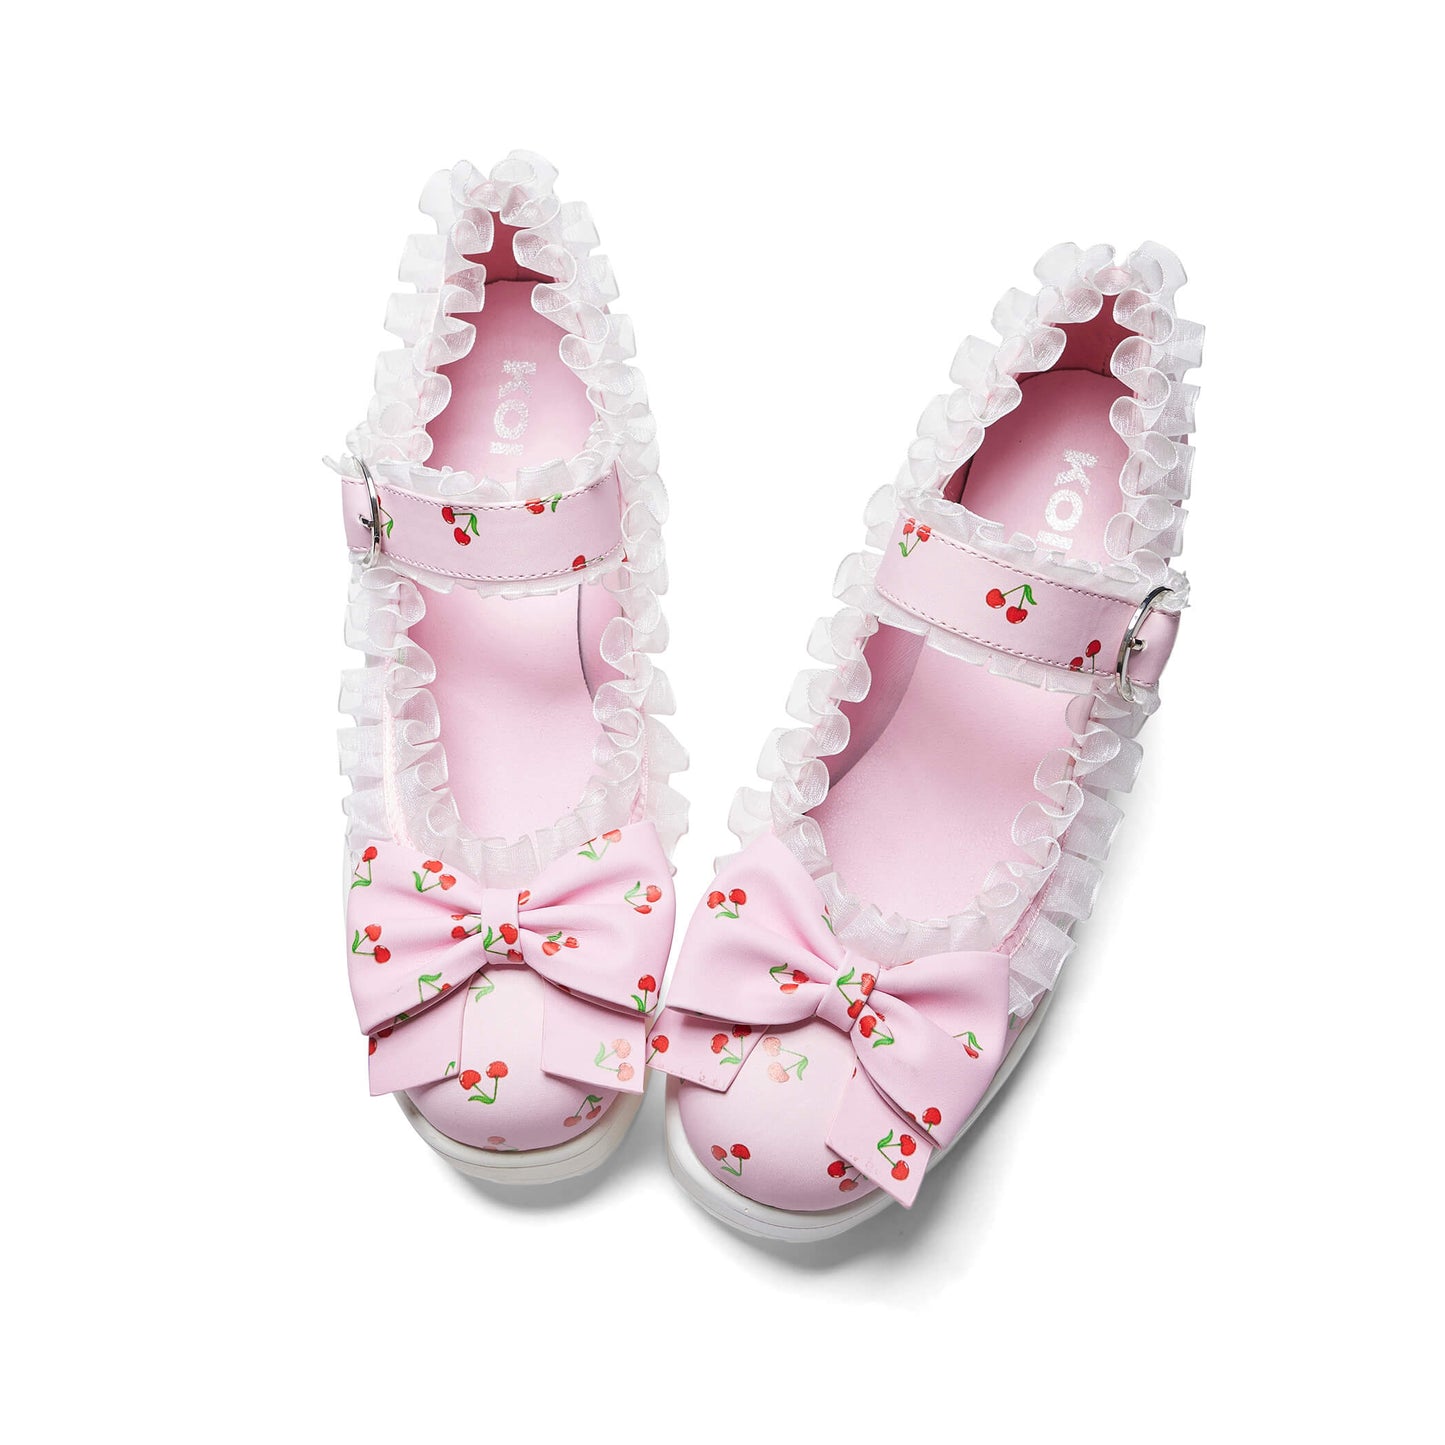 Tira Mary Janes Shoes 'Pink Cherry Bakewell Edition' - Mary Janes - KOI Footwear - Pink - Top View